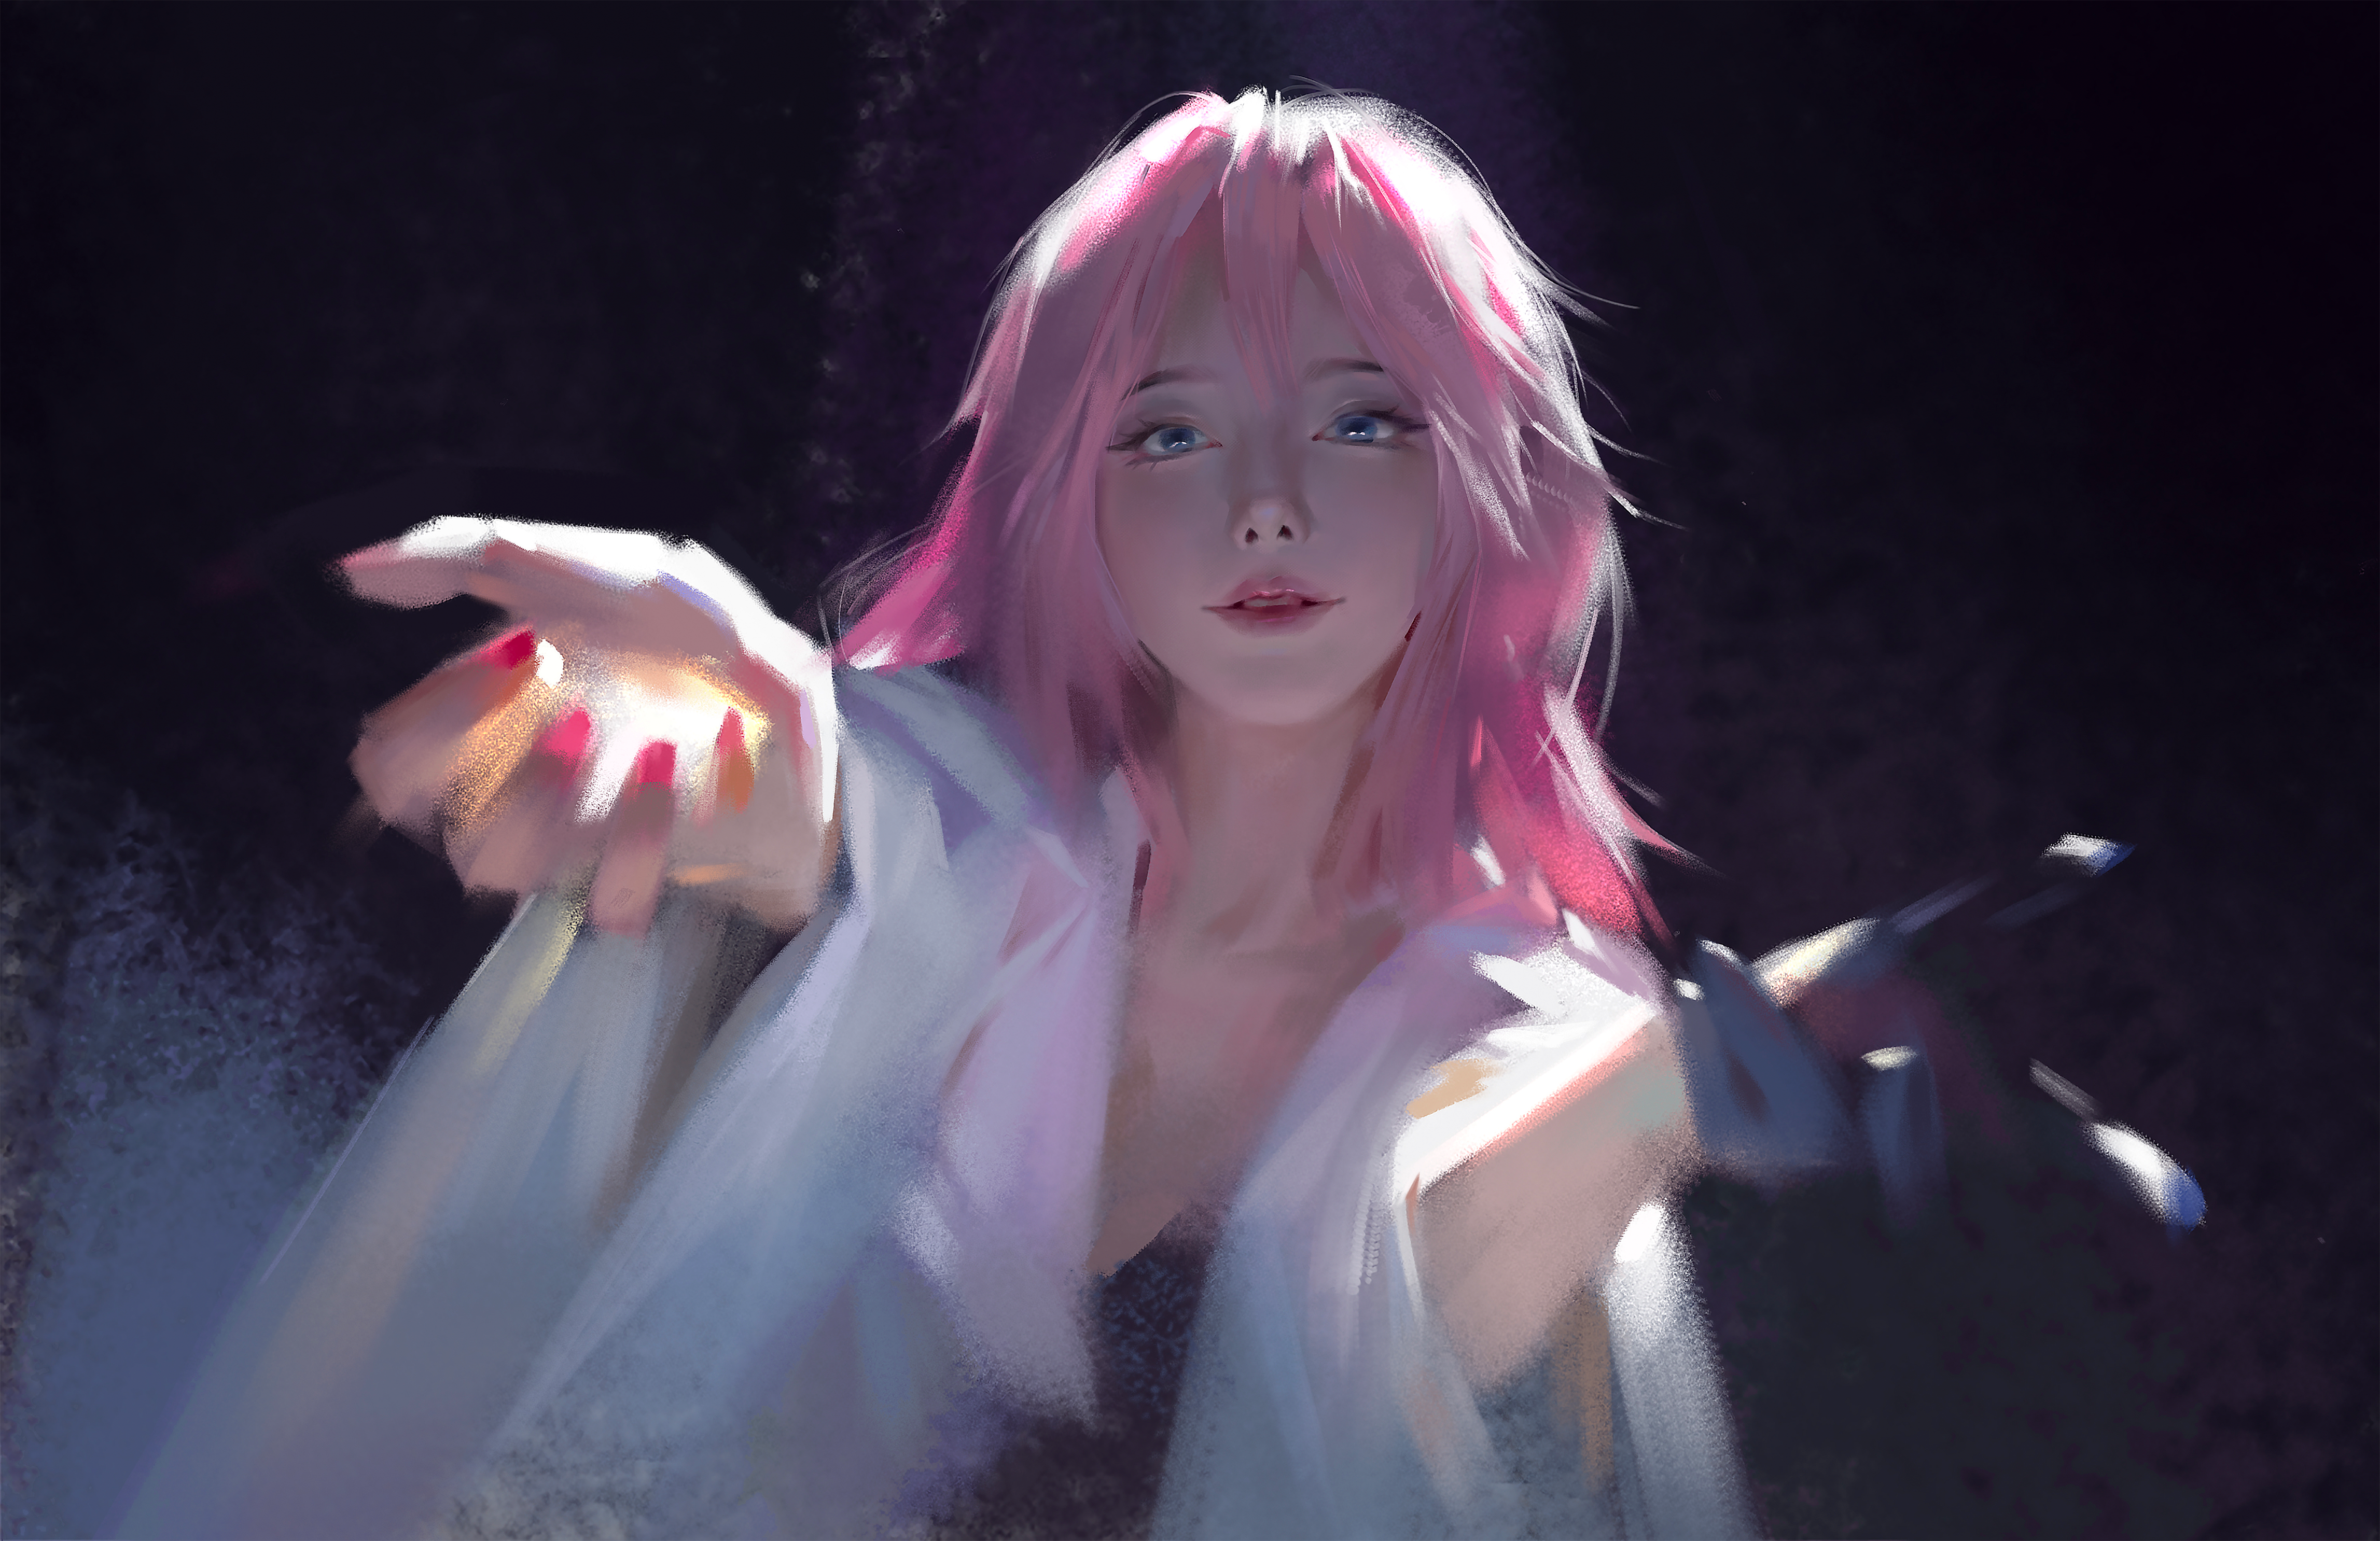 General 4589x2972 Wang Xiao digital art artwork illustration women pink hair simple background open mouth Asian looking at viewer arms reaching people anime boys men